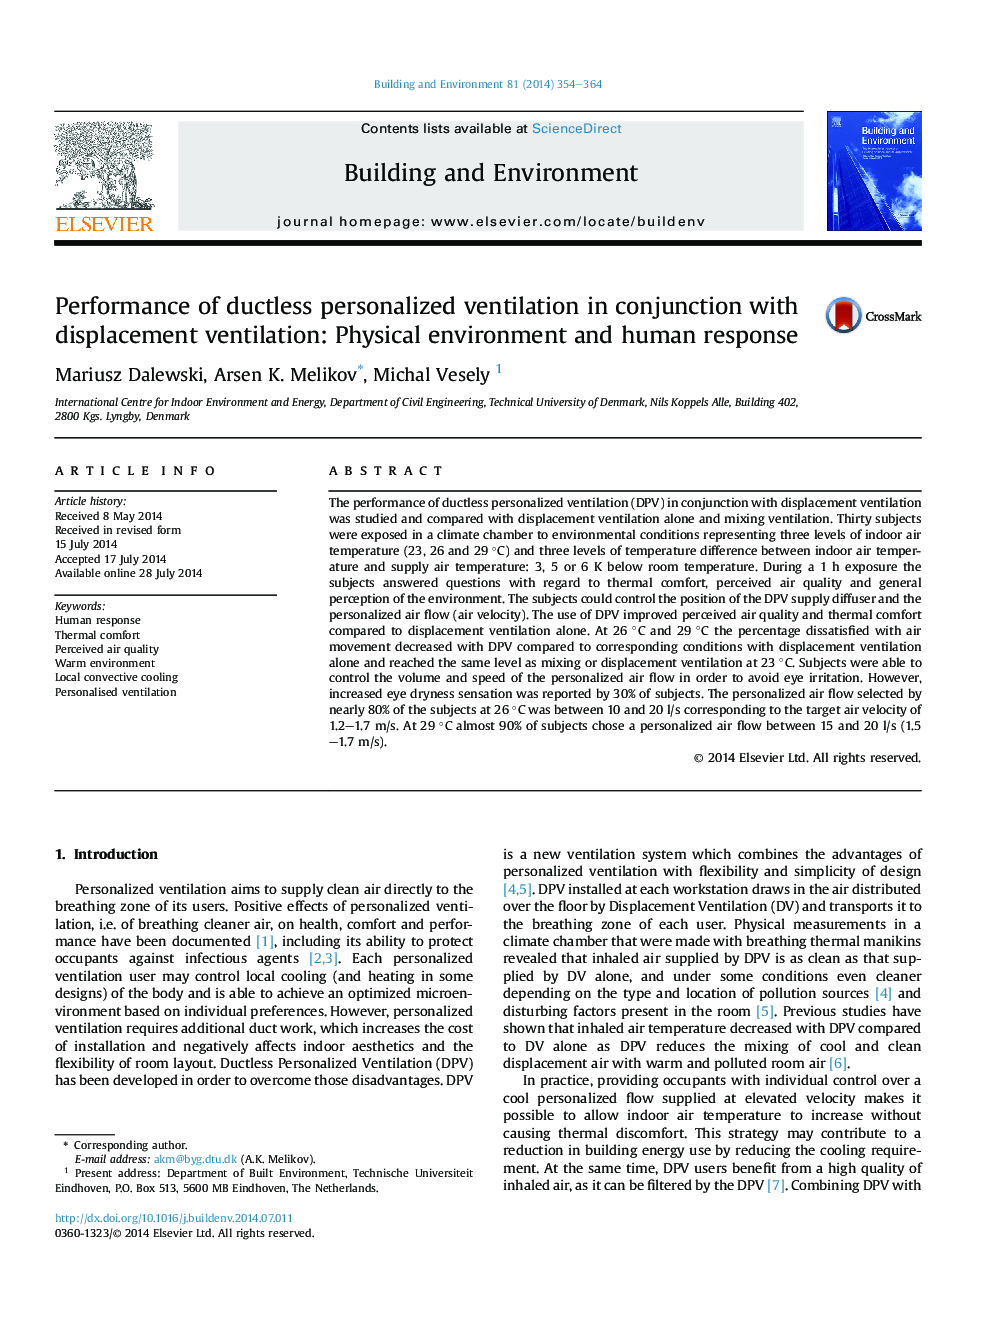 Performance of ductless personalized ventilation in conjunction with displacement ventilation: Physical environment and human response